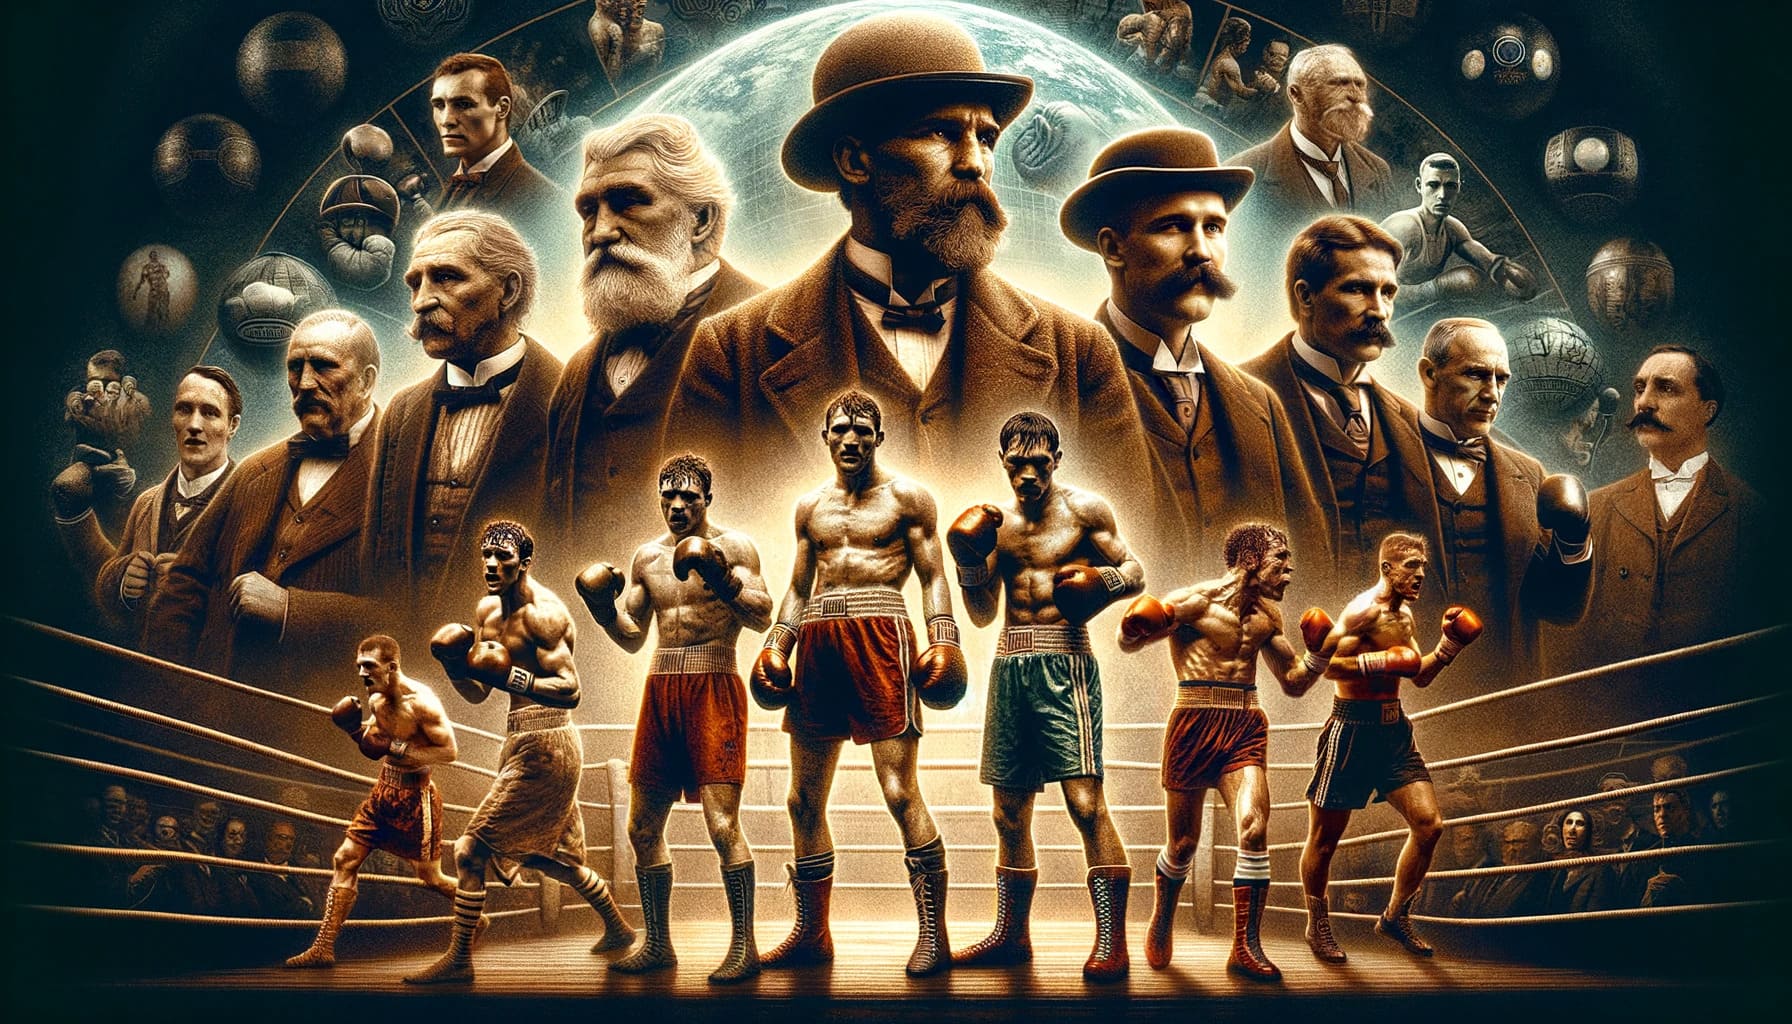 Historical boxing legends montage with vintage boxers and old-fashioned sport equipment